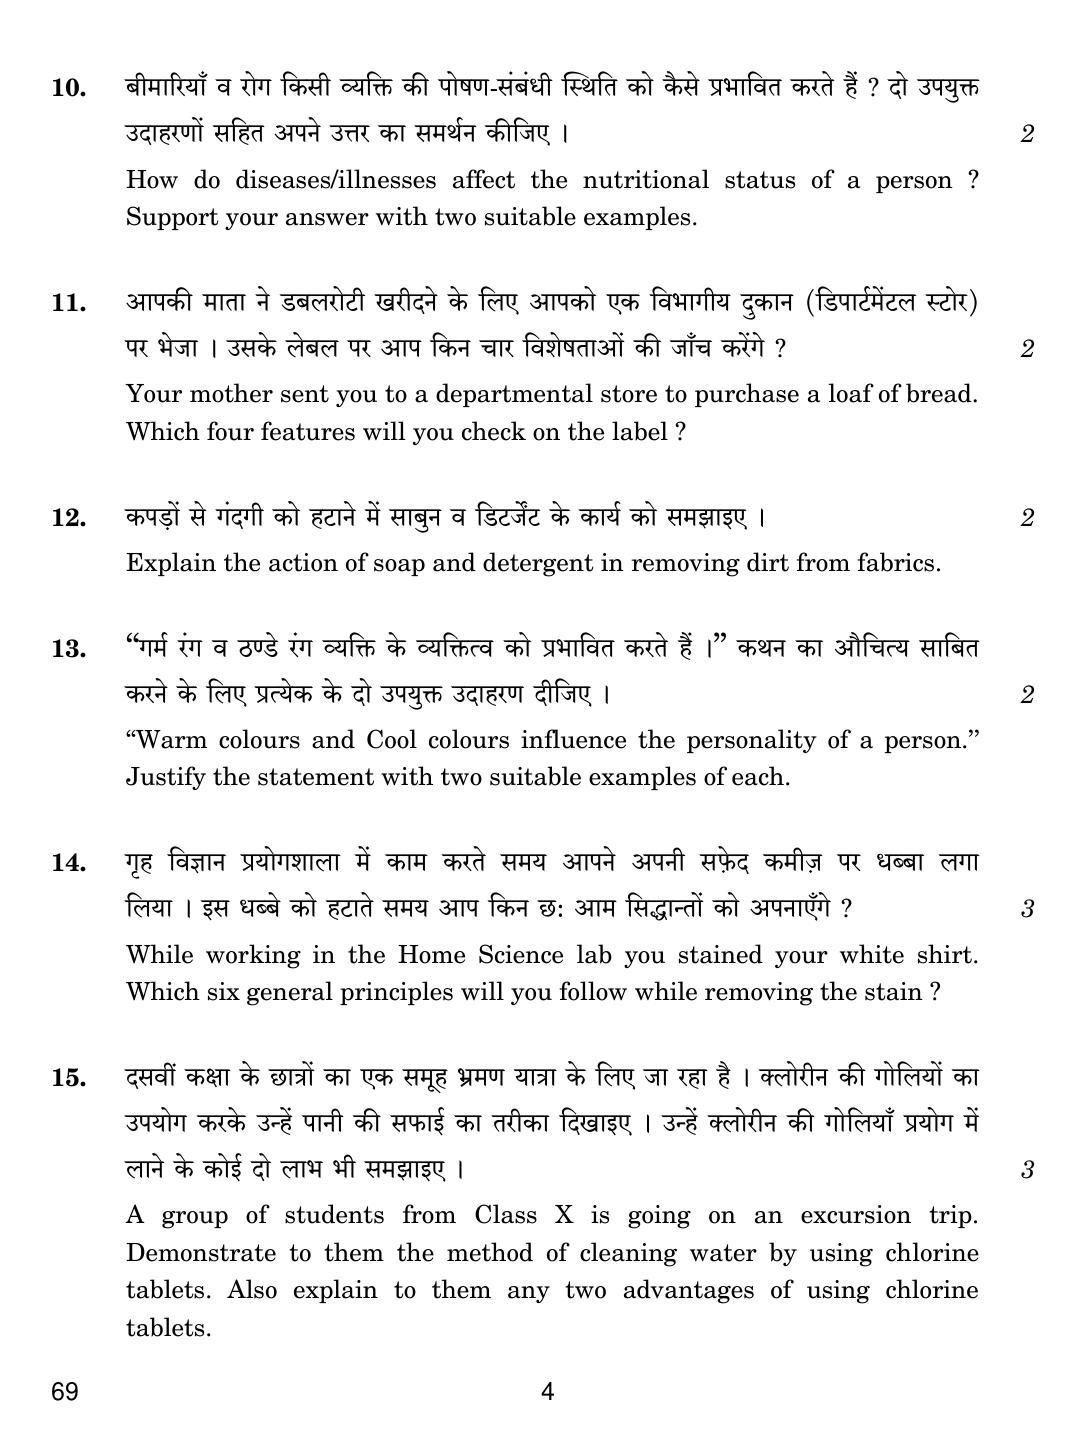 CBSE Class 12 69 HOME SCIENCE 2018 Question Paper - Page 4